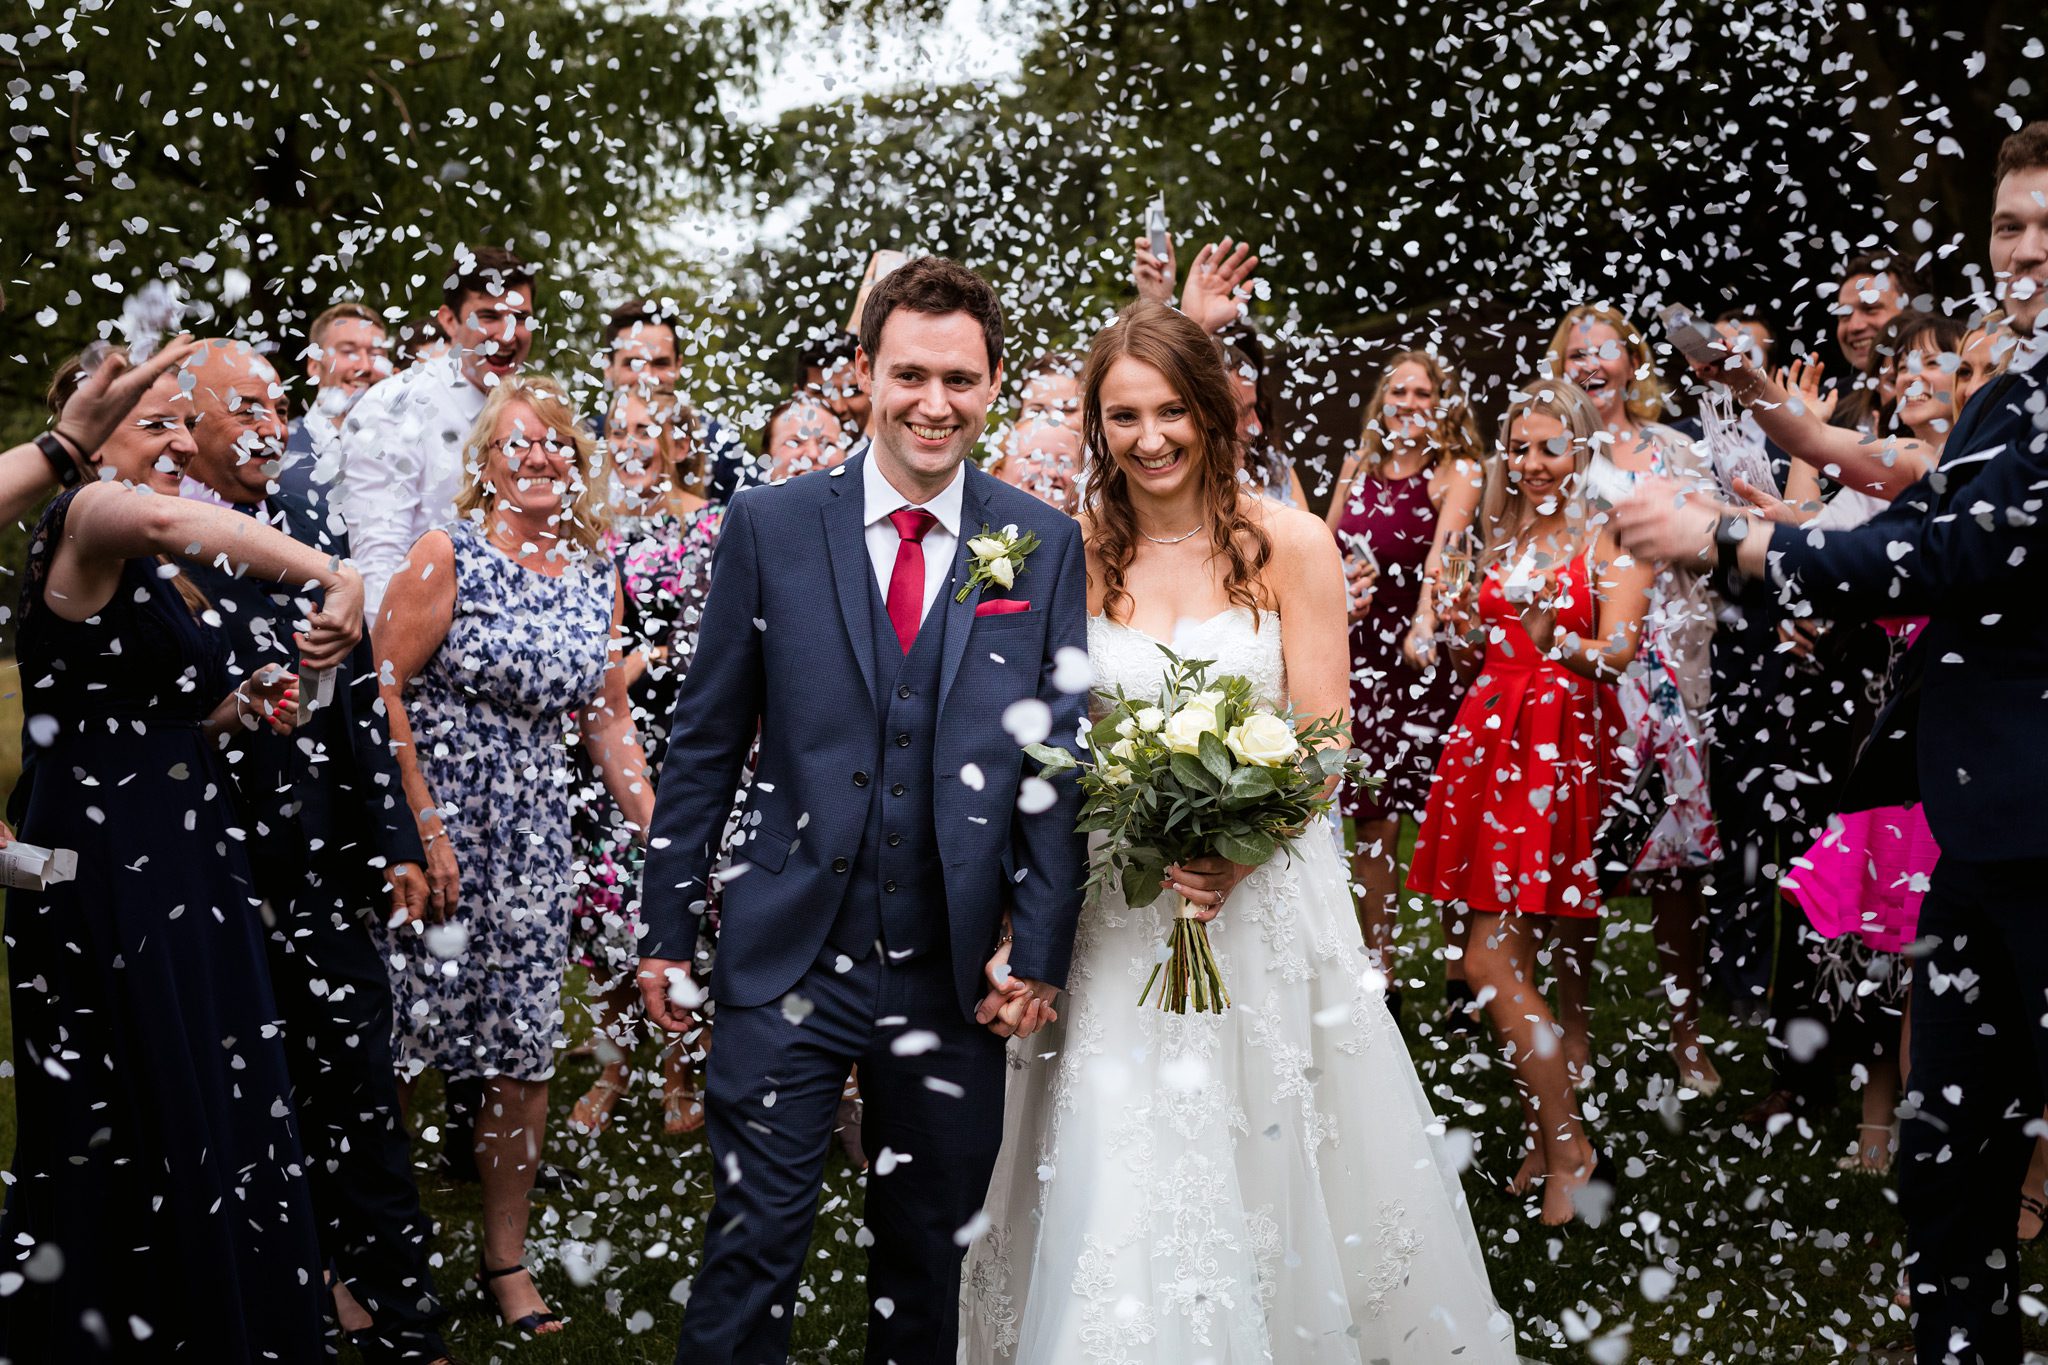 Amazing Confetti Throw at Losehill House. Sarah and Ryan's guests throwing huge amounts of confetti over them.